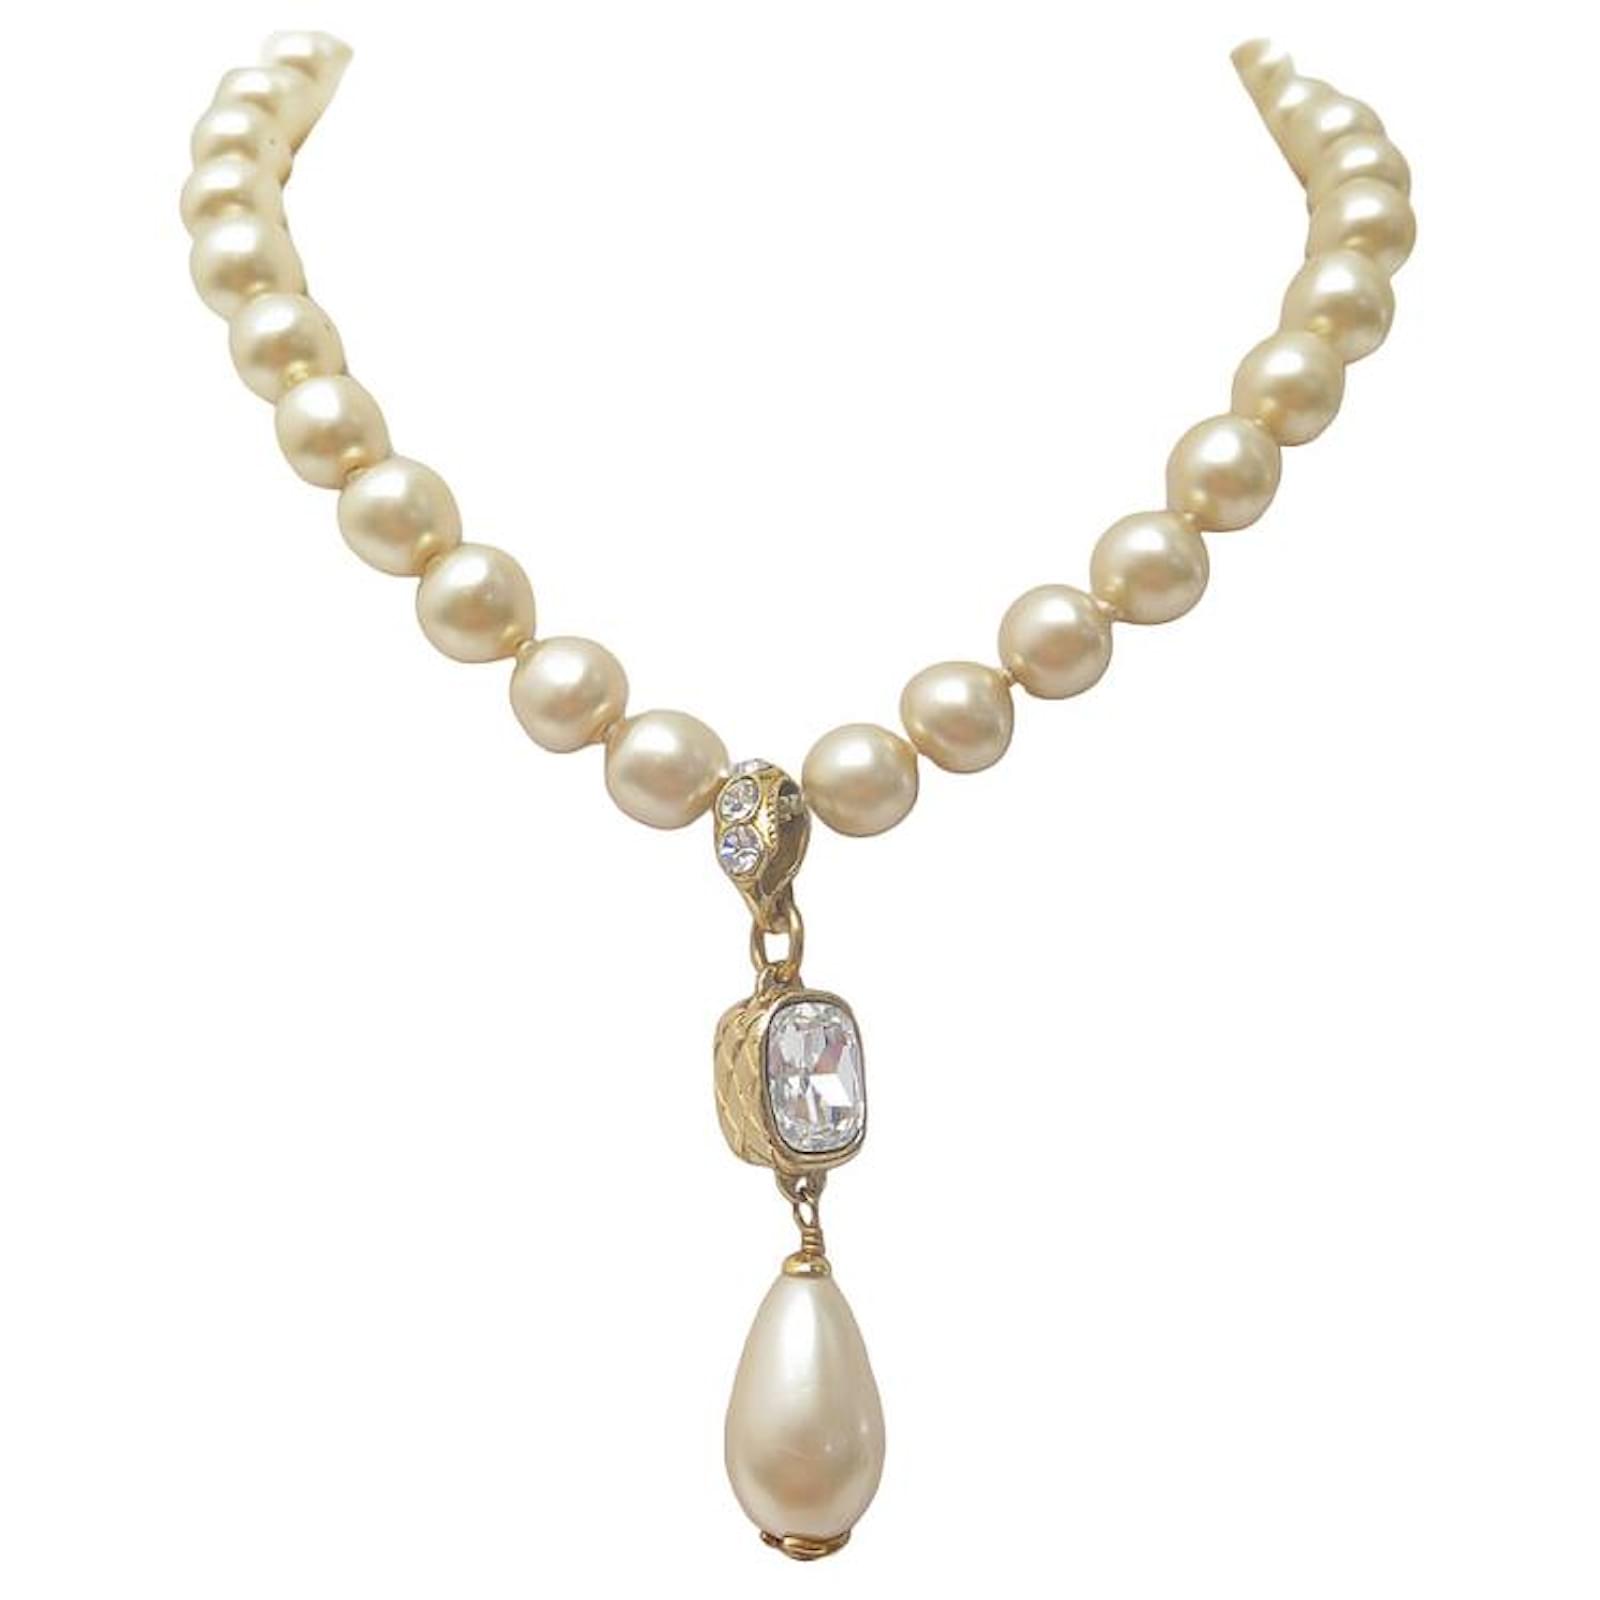 VINTAGE CHANEL NECKLACE WITH PEARLS & STRASS PENDANT 45 METAL PEARLS  NECKLACE Golden ref.920751 - Joli Closet